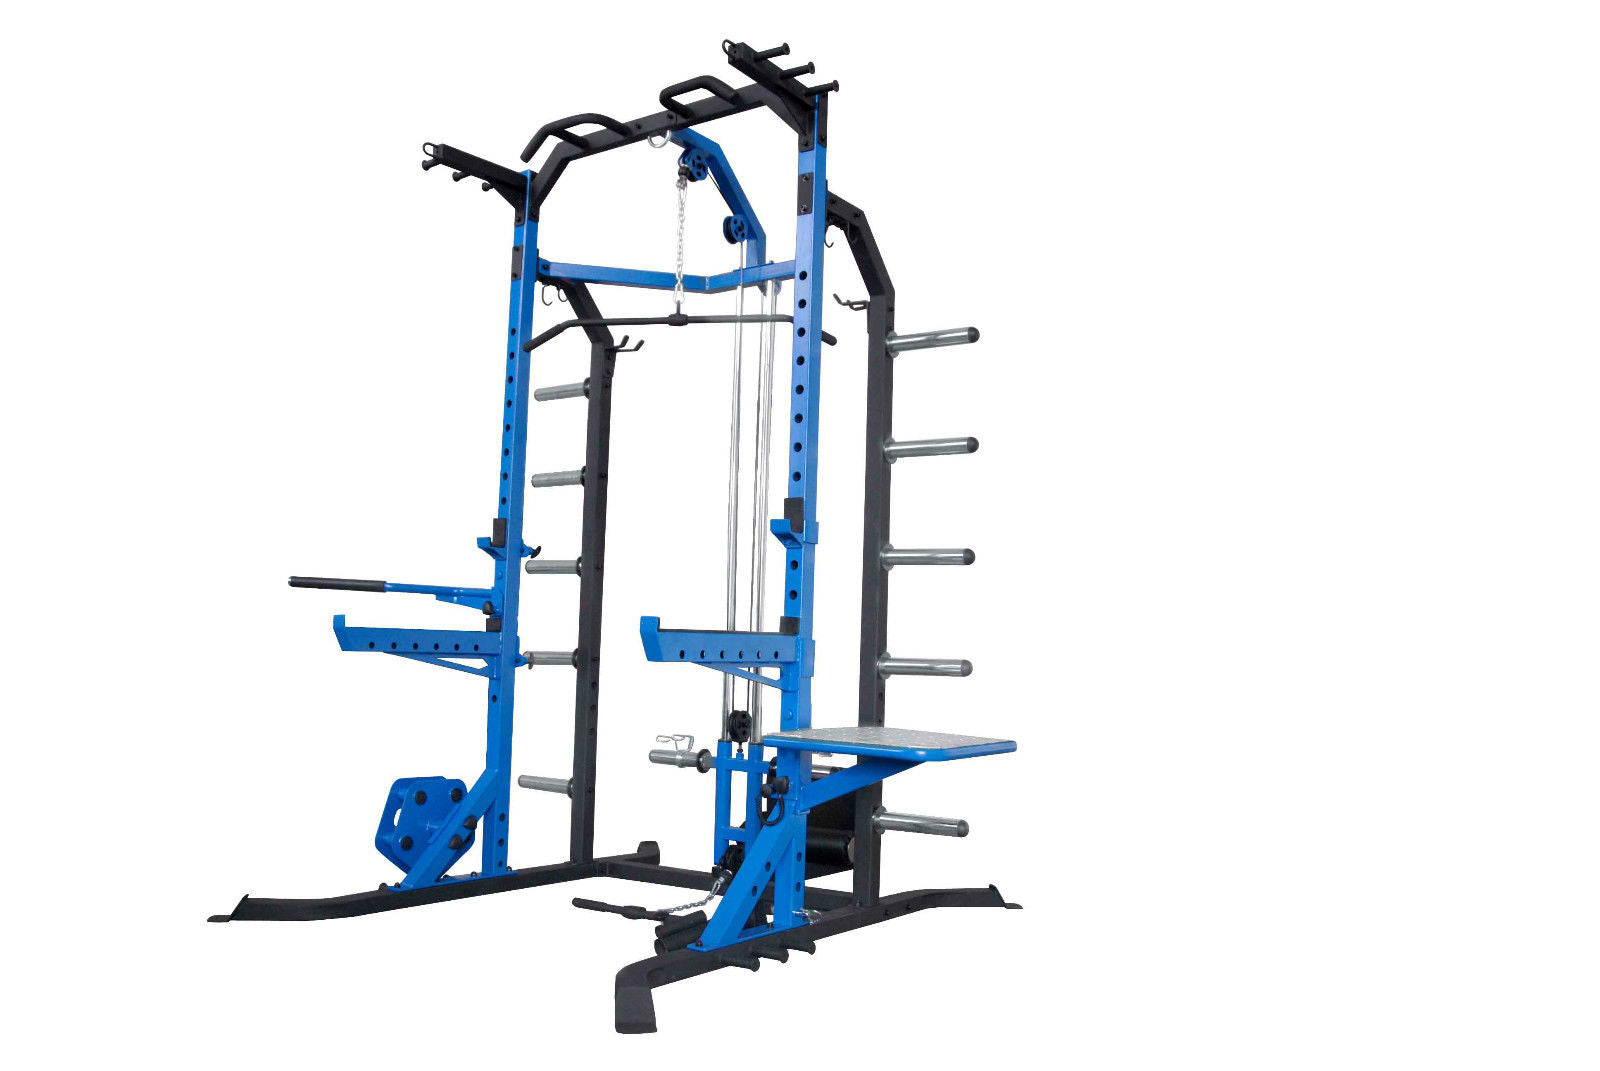 Half Rack Power Cage multi gym from WeRSports